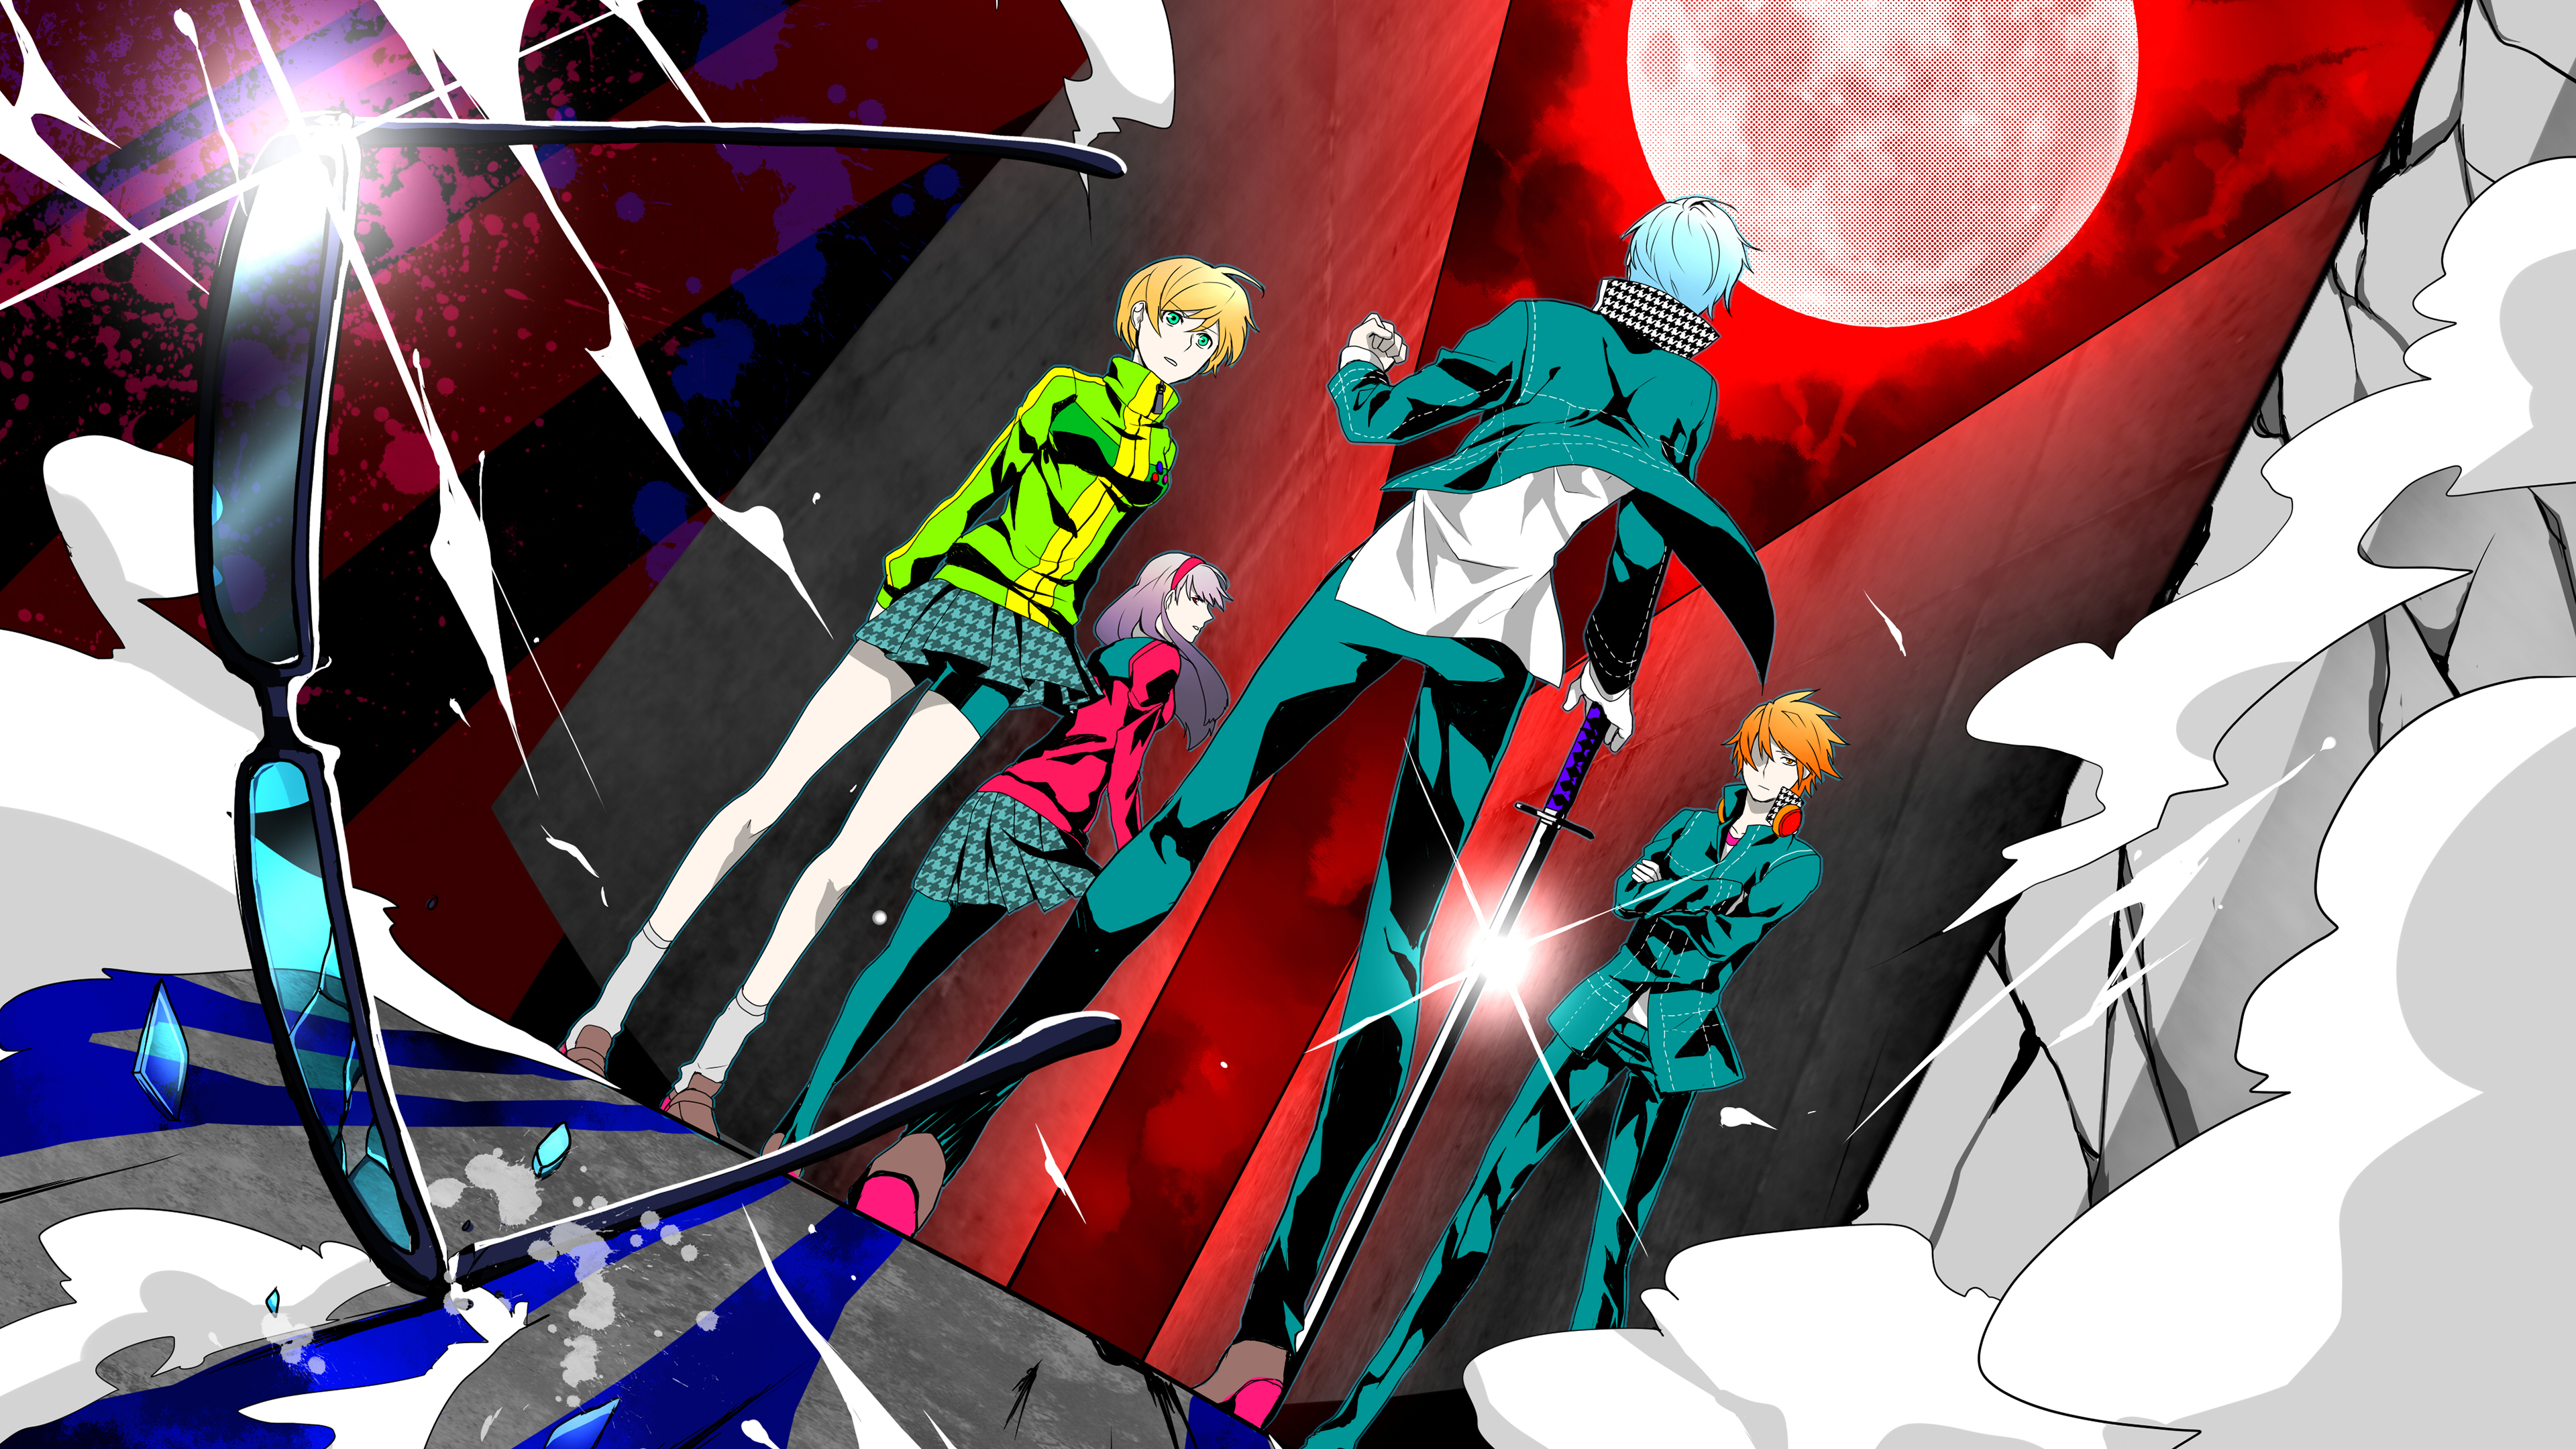 3840x2160 140+ Persona 4 HD Wallpapers and Backgrounds